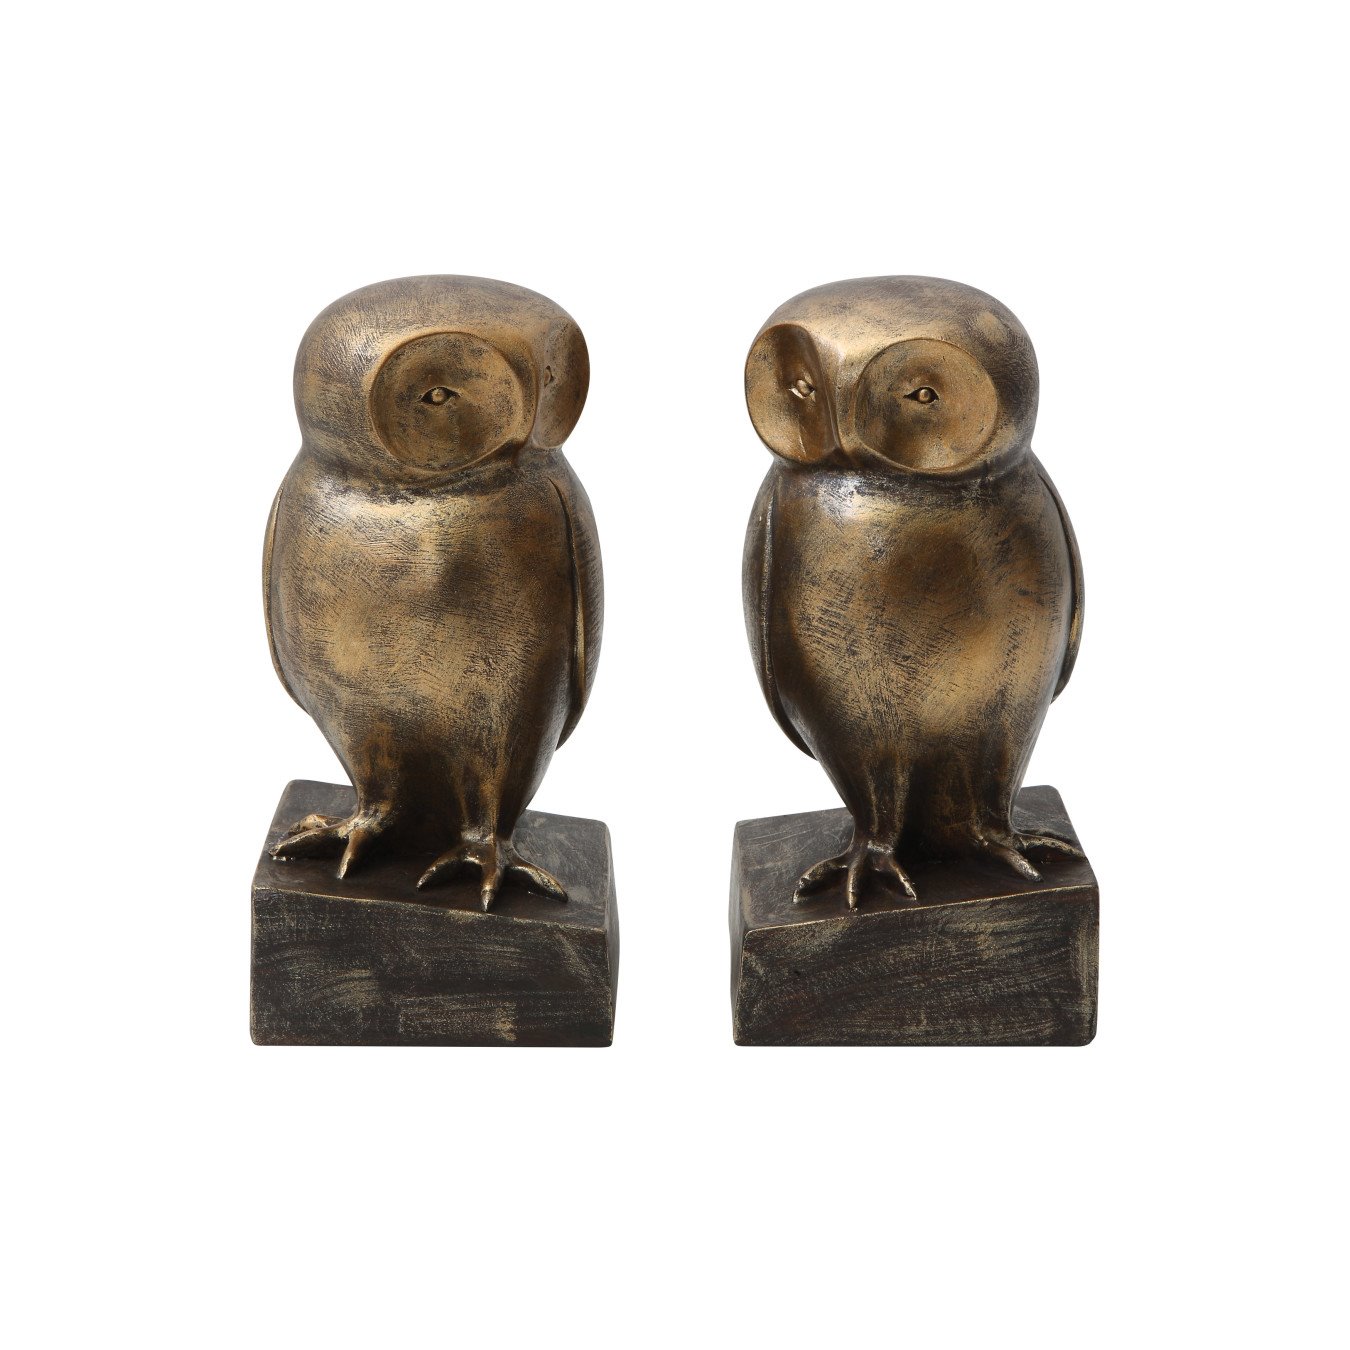 Resin Owl Shaped Bookends with Bronze Finish (Set of 2 Pieces)